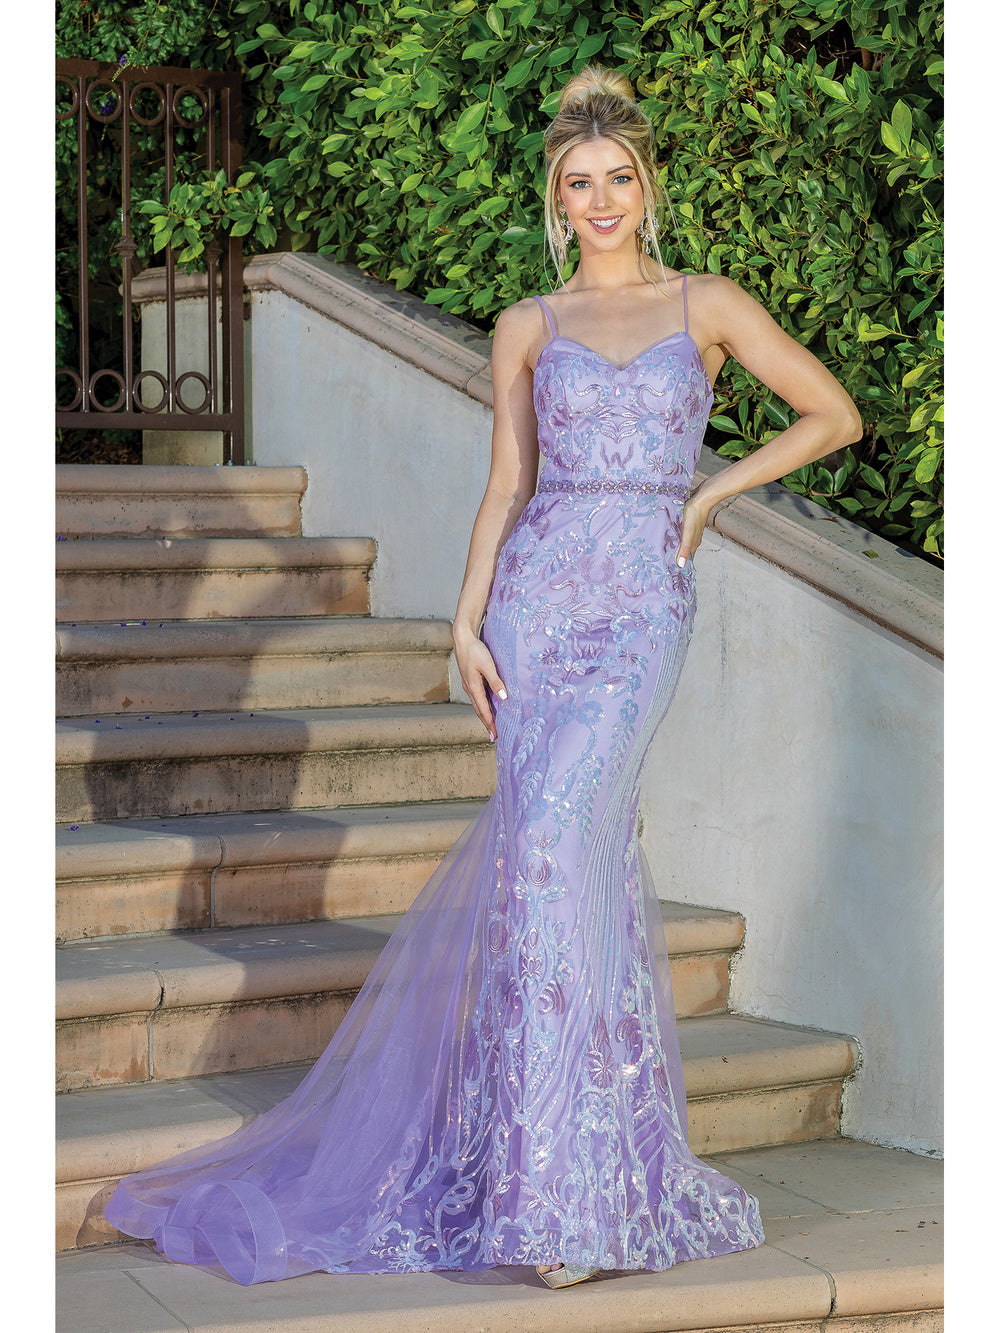 DQ 4220 Size 6 Lilac Long Mermaid Prom Dress Pageant Gown Sequin Lace V Neck  Available Size: 6  Available Color: Lilac